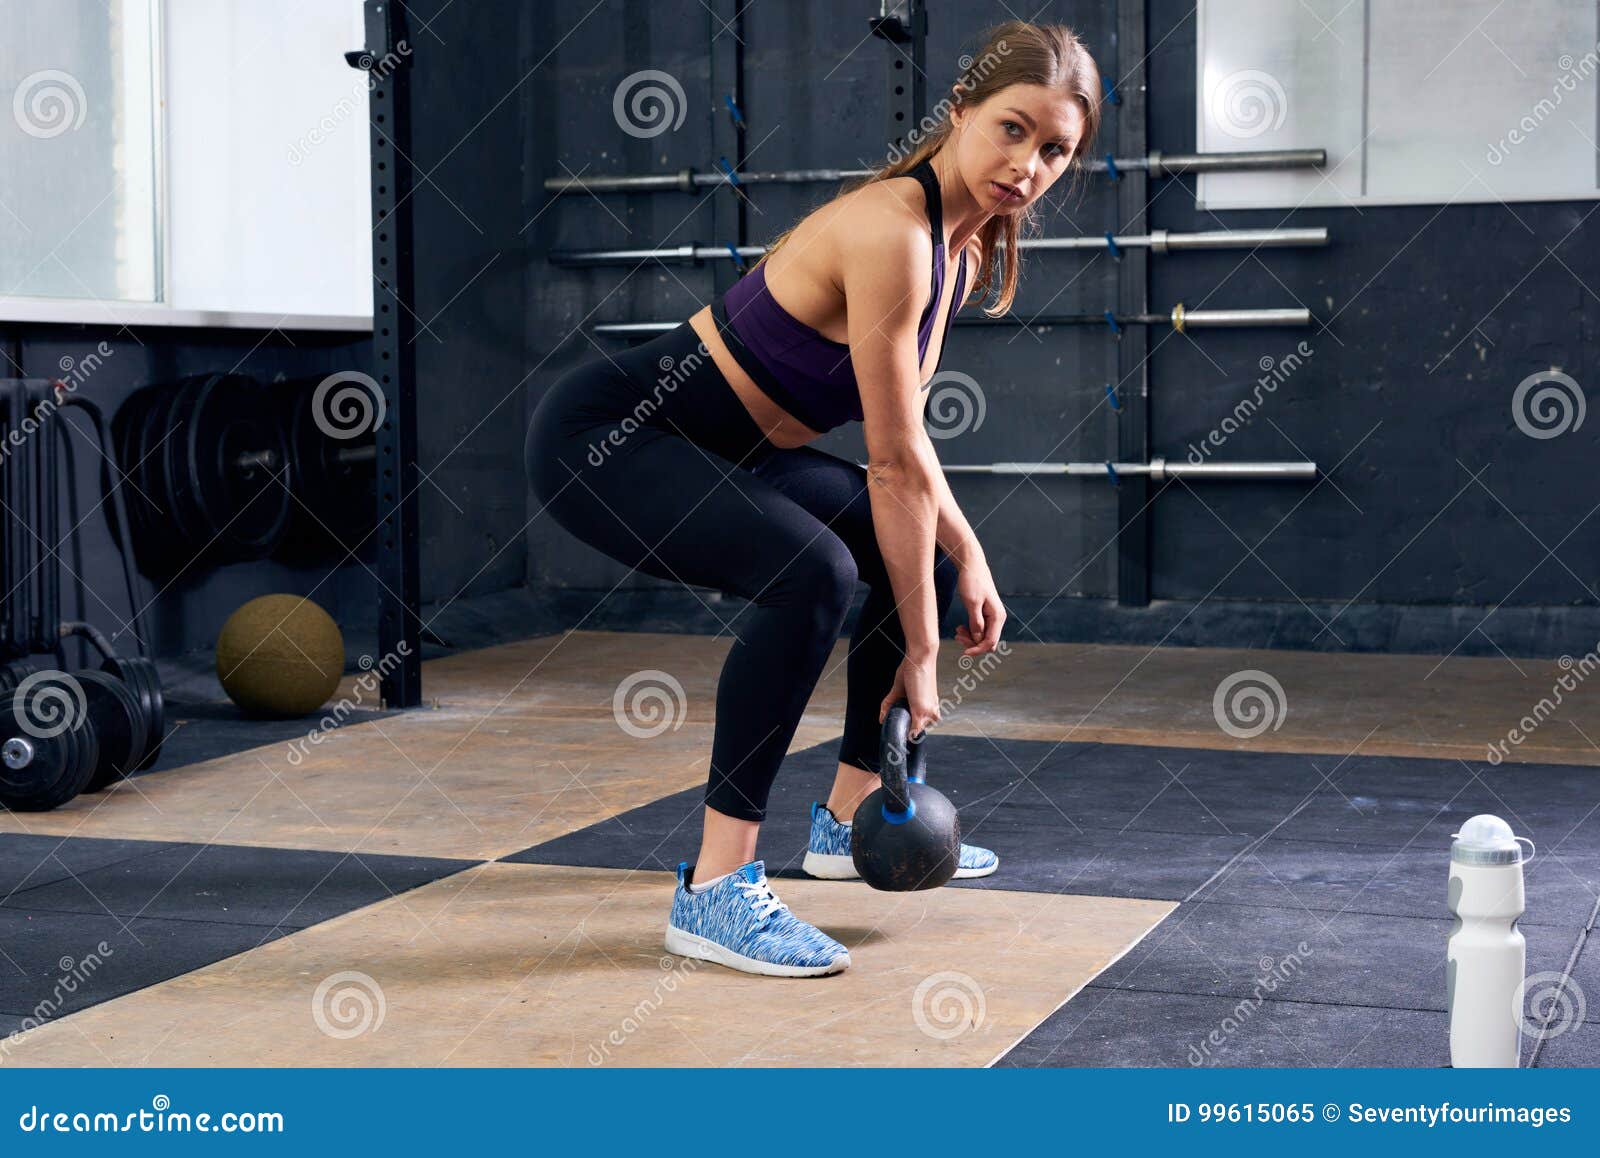 Young Woman Lifting Kettlebell in Gym Stock Image - Image of squat ...